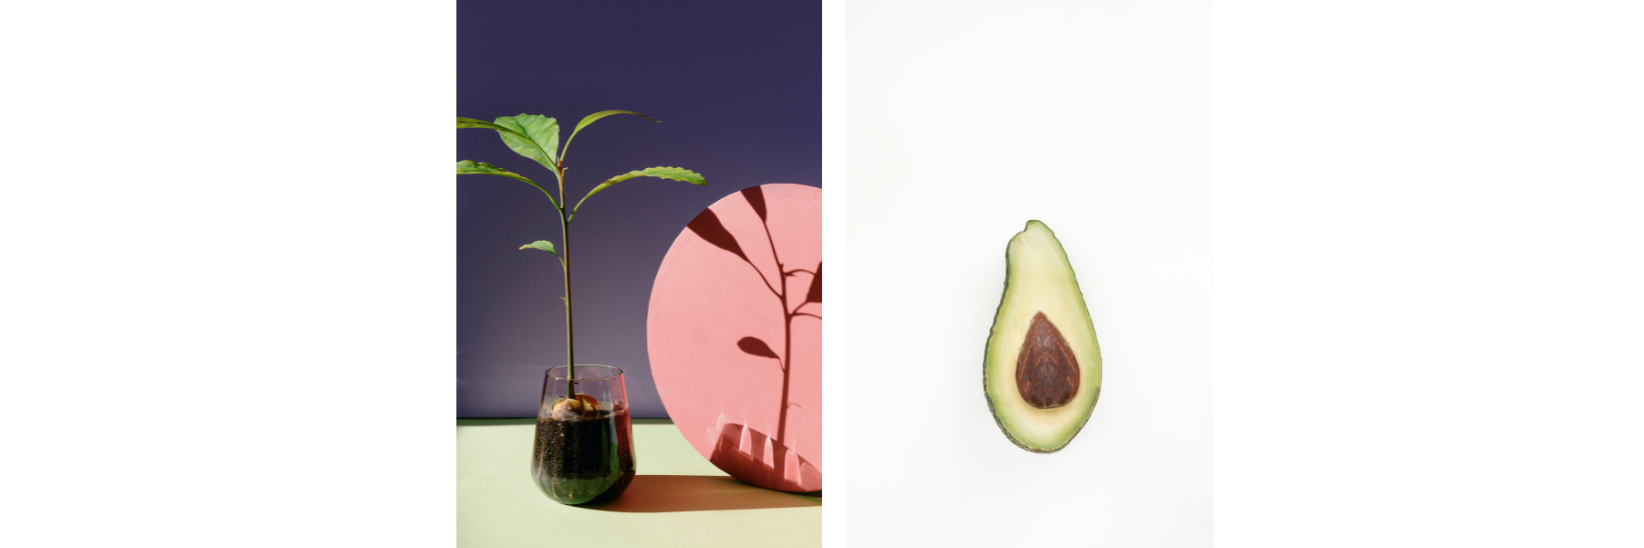 7 Fruit Trees you can grow indoors - Avocado